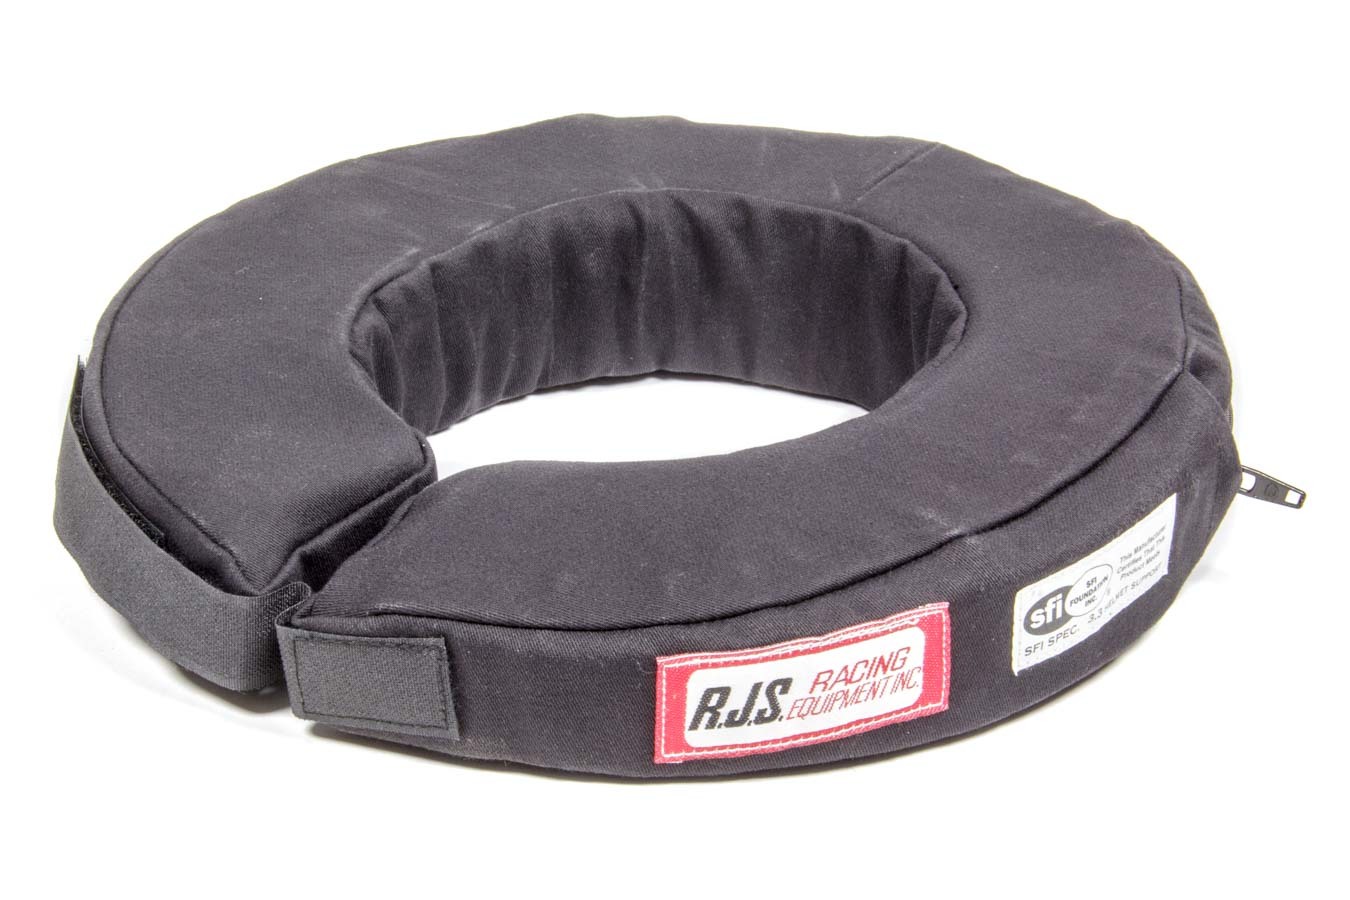 RJS Safety 11000401 - Neck Support, 360 Degree, SFI 3.3, Padded, Fire Retardant Cotton, Black, Each